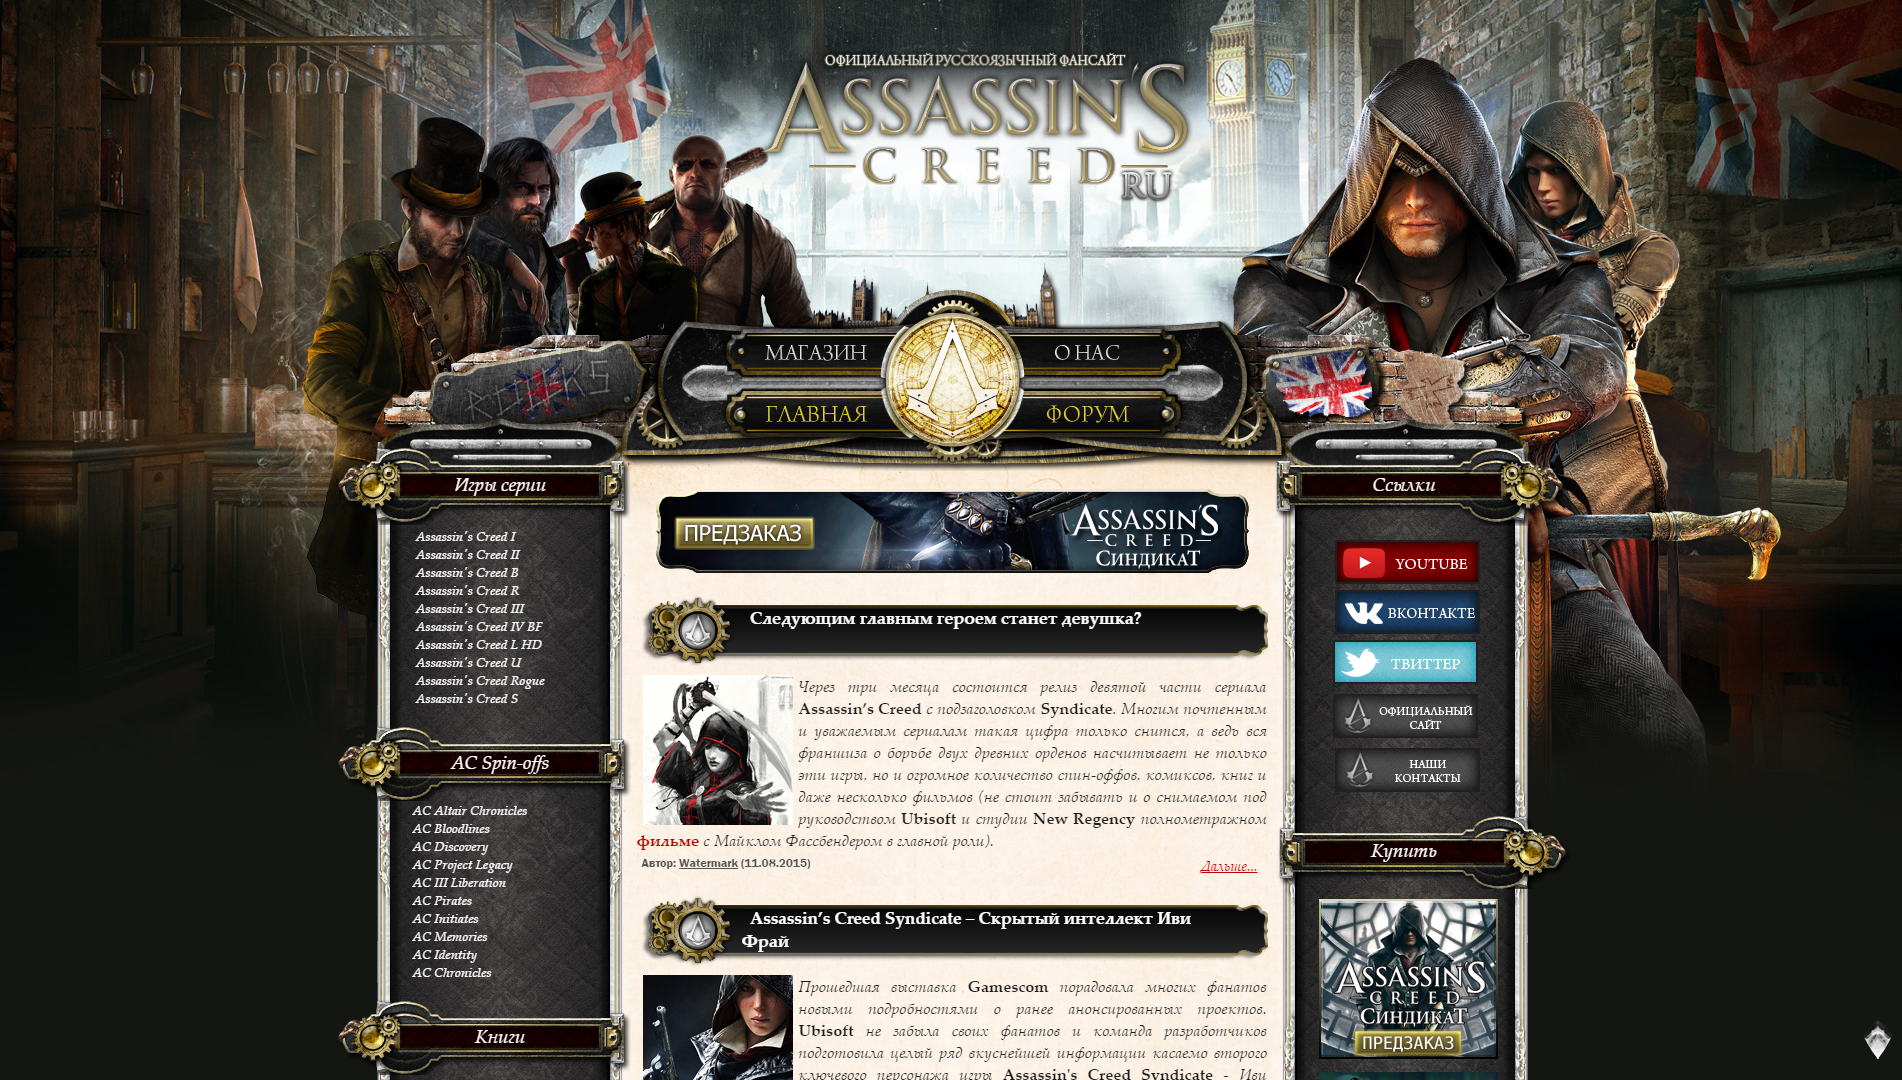 Assassin's Creed Syndicate site design